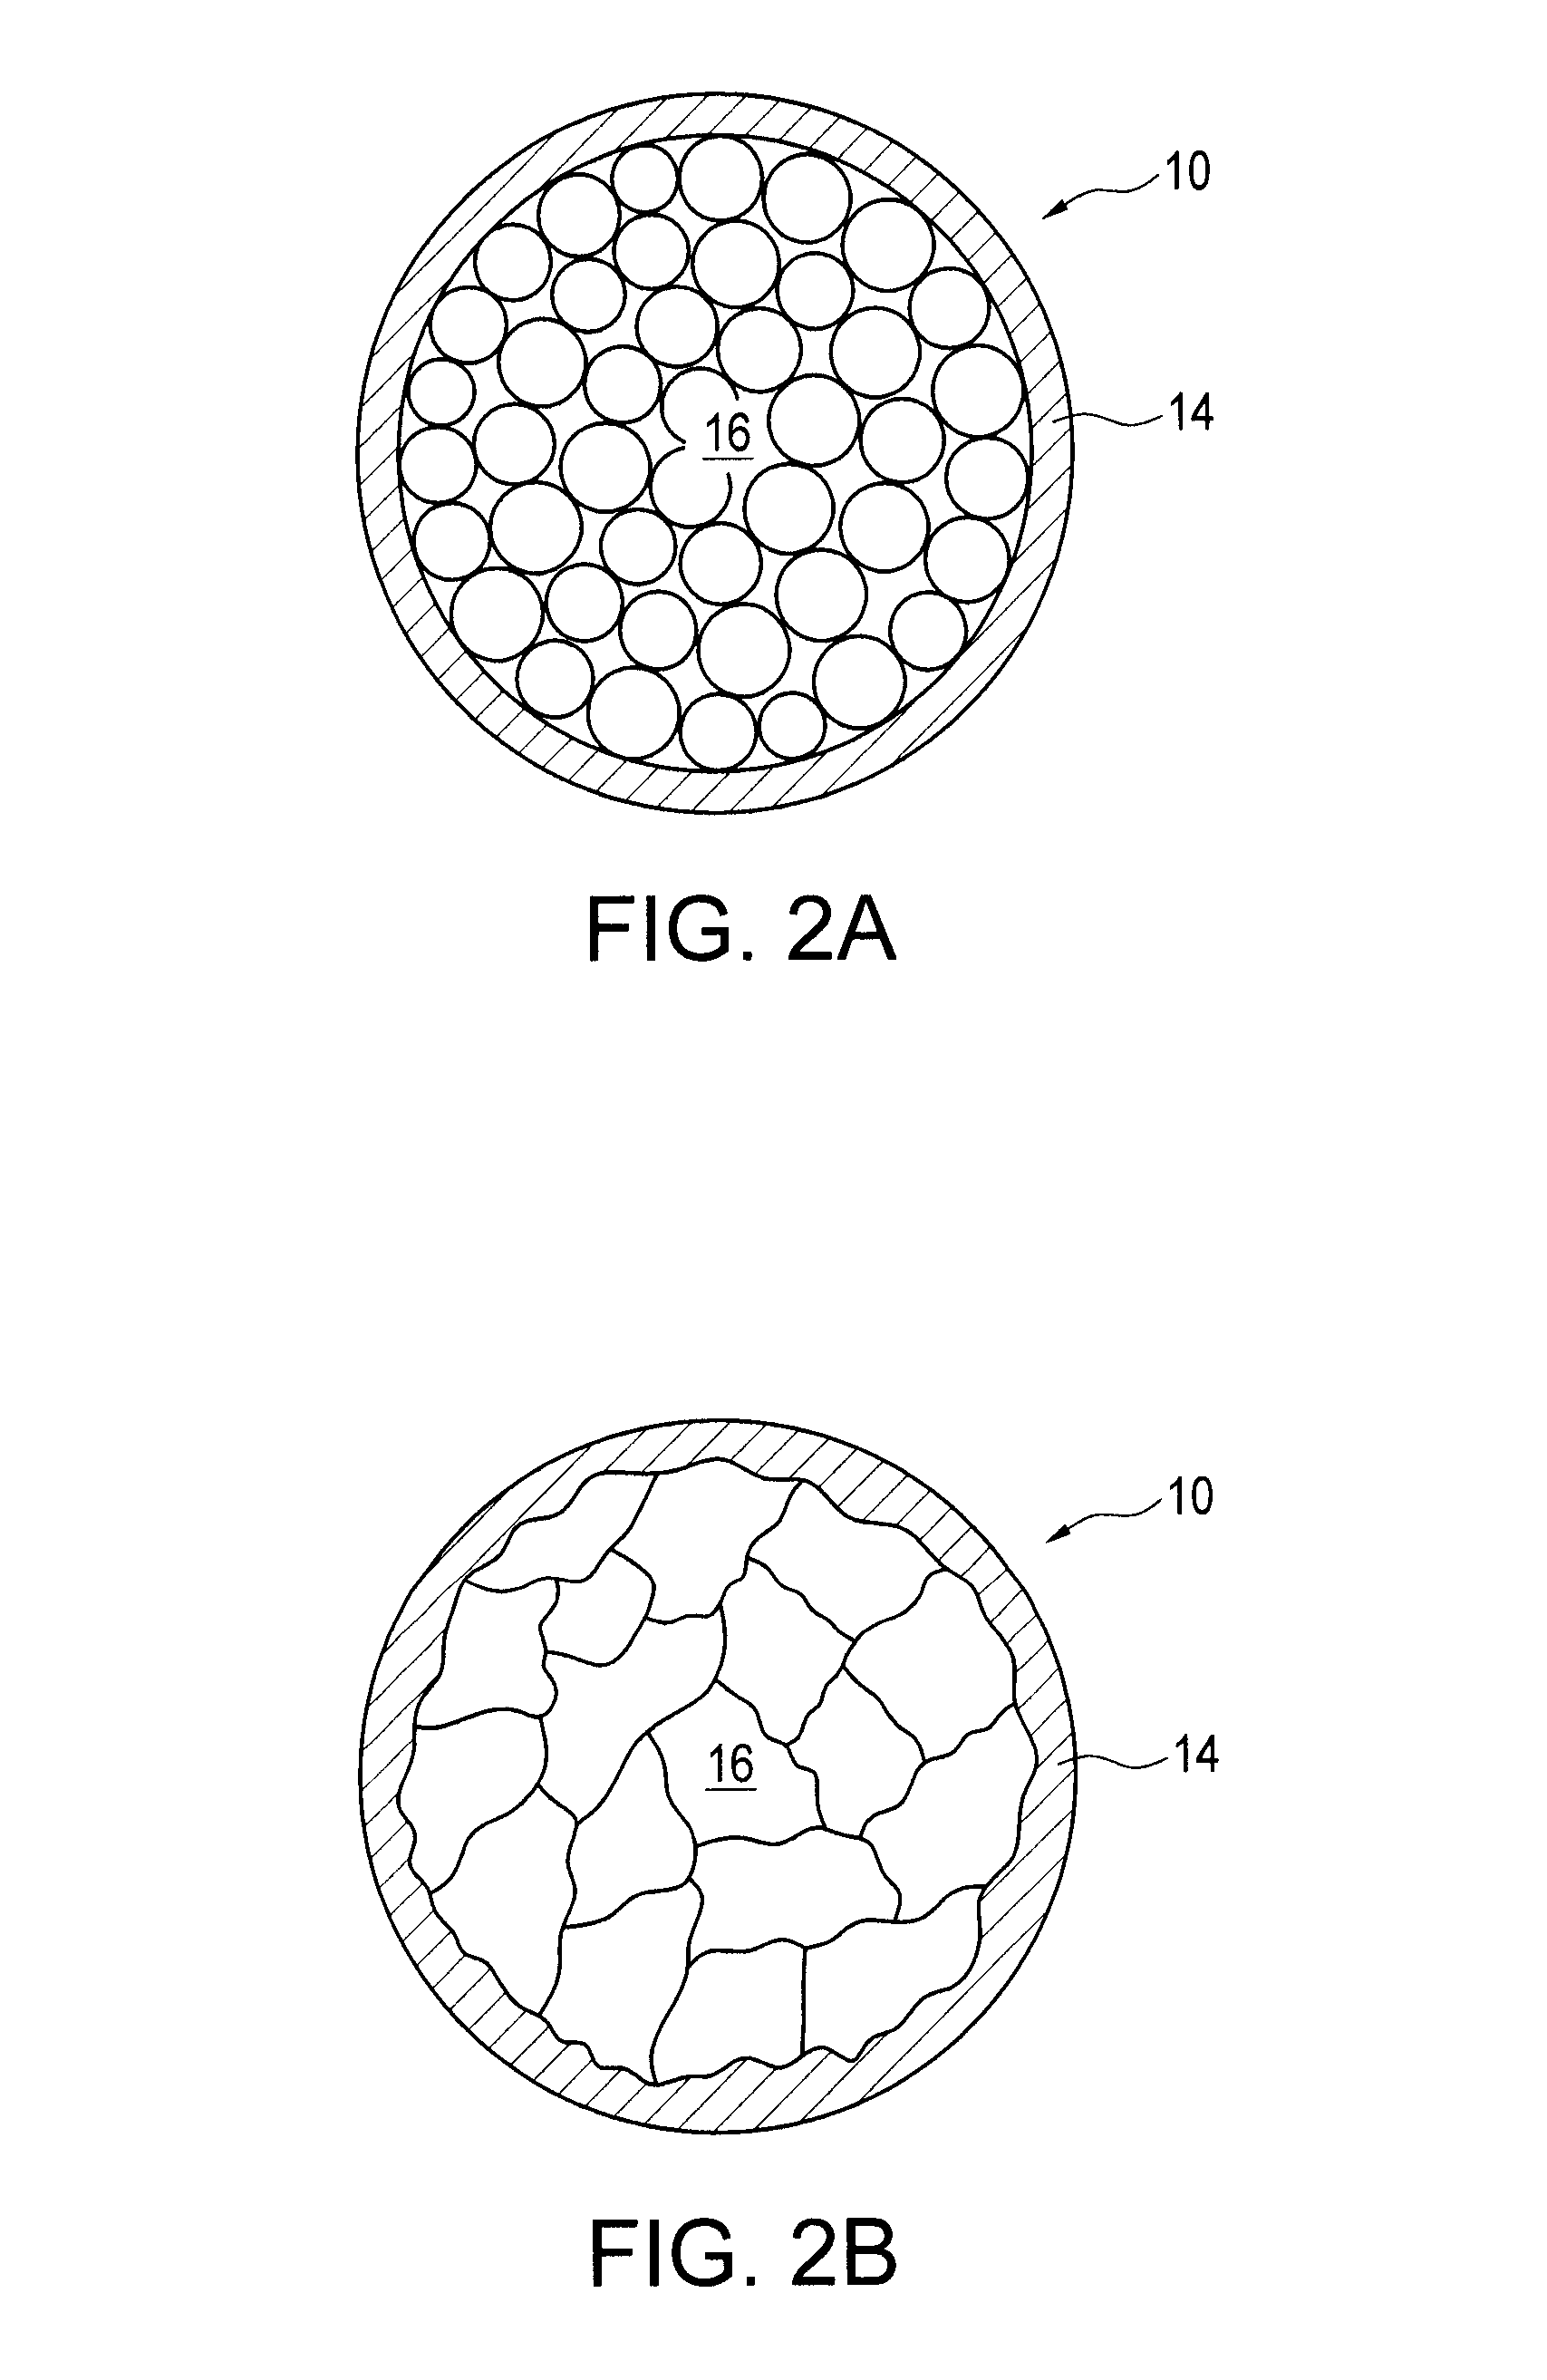 Additives for controlling lost circulation and methods of making and using same